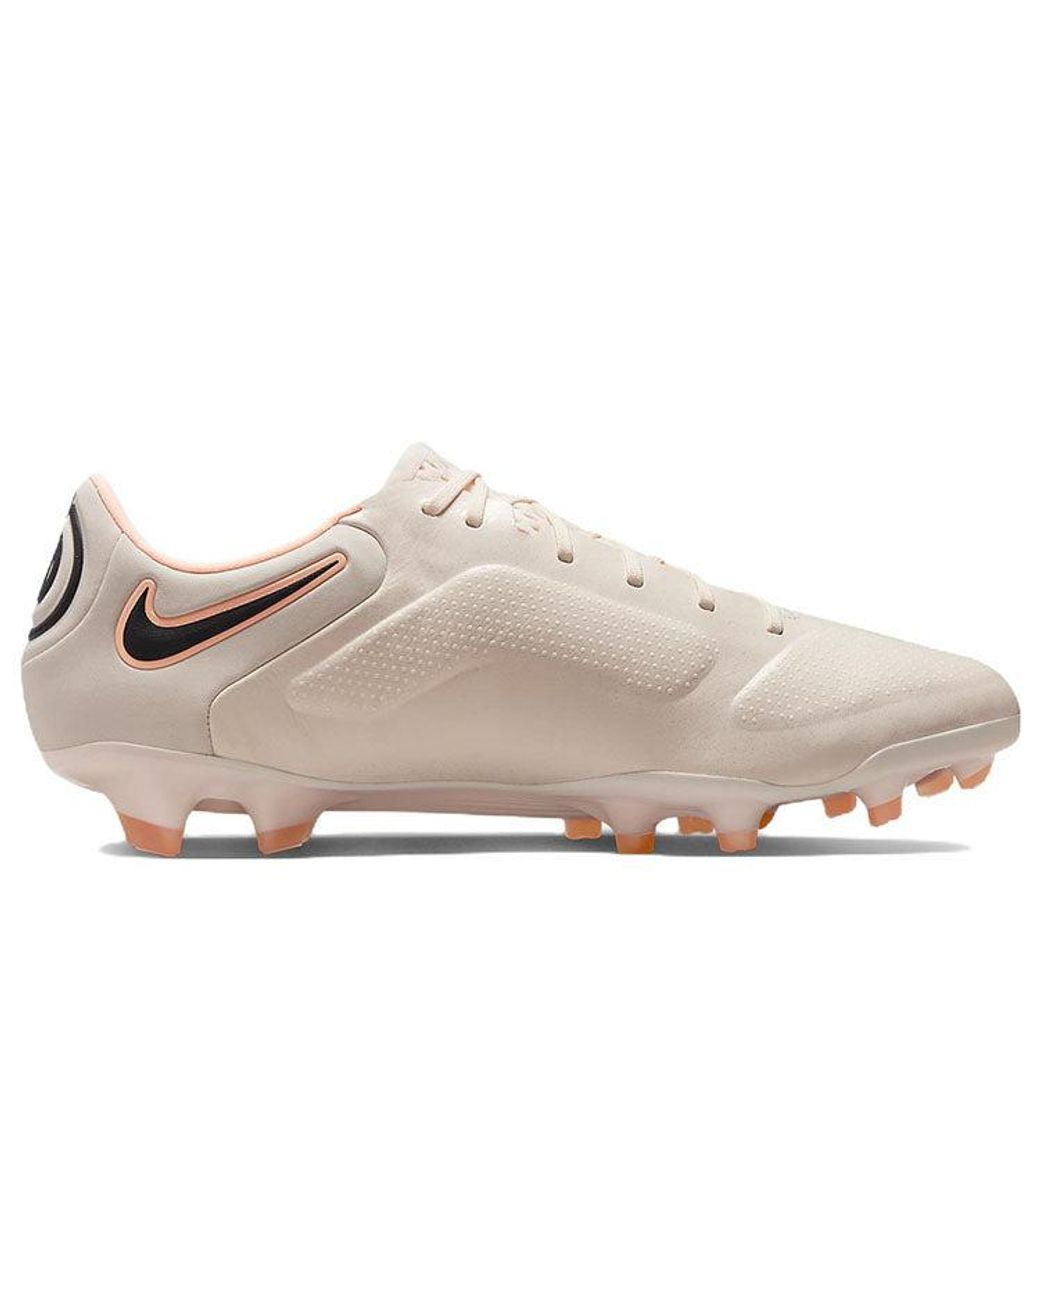 Nike Tiempo Legend 9 Elite Fg Turf Soccer Cleats/football Boots Pink Yellow  in White for Men | Lyst